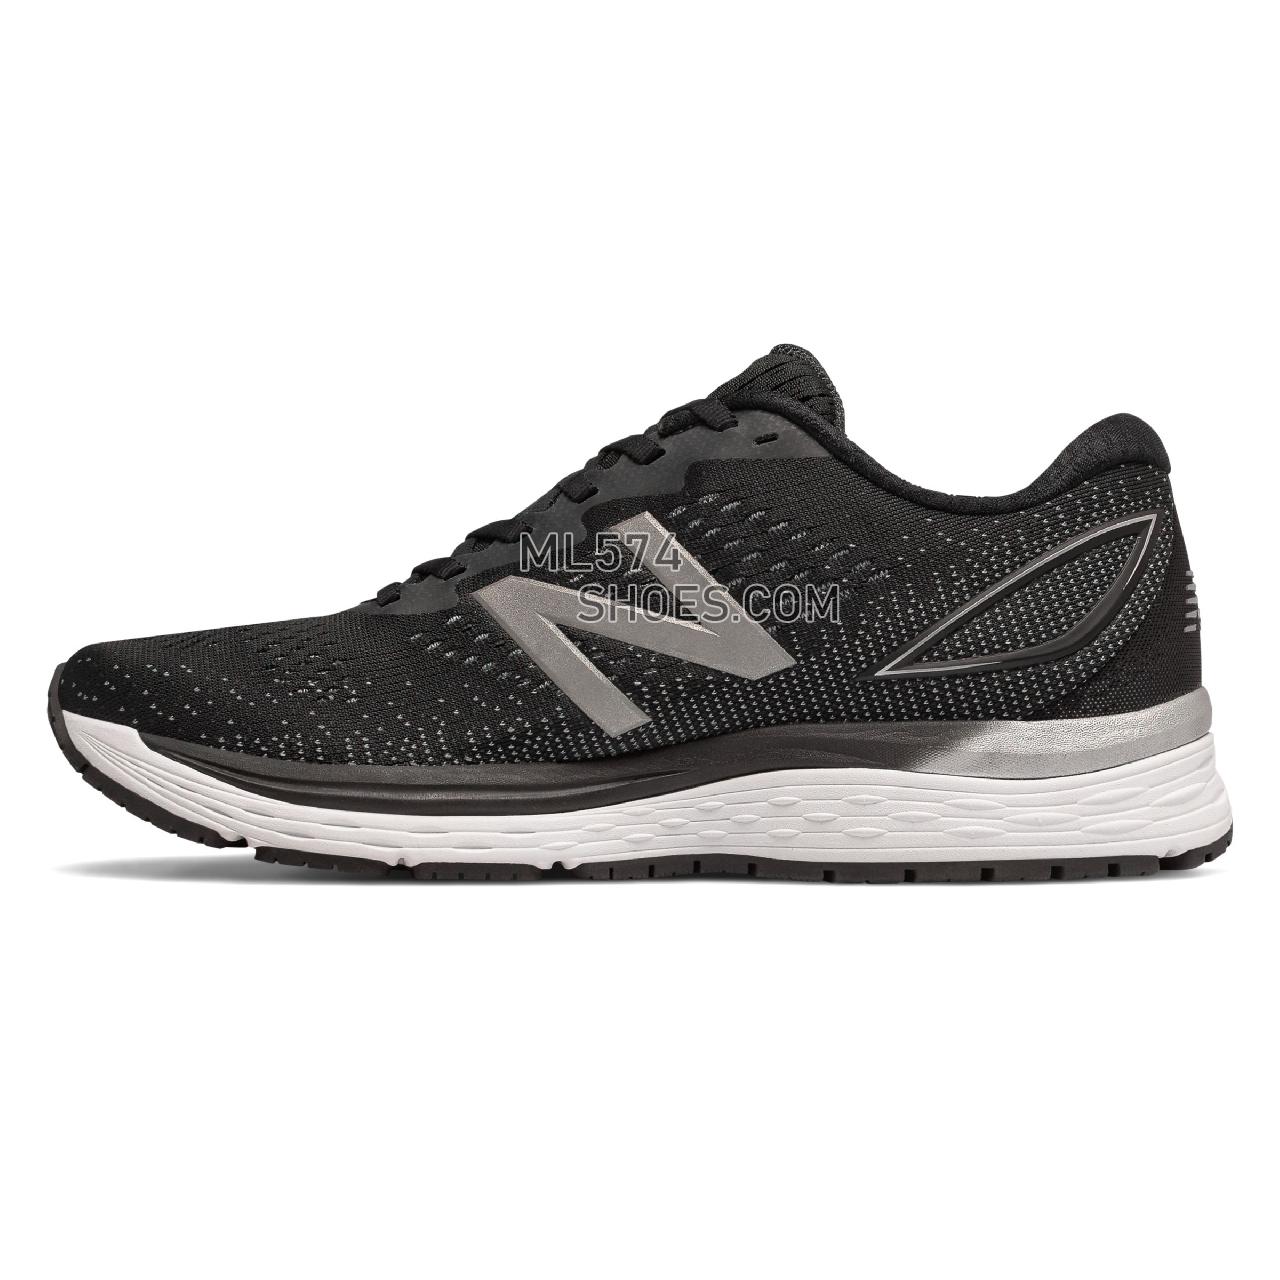 New Balance 880v9 - Men's Neutral Running - Black with Steel and Orca - M880BK9